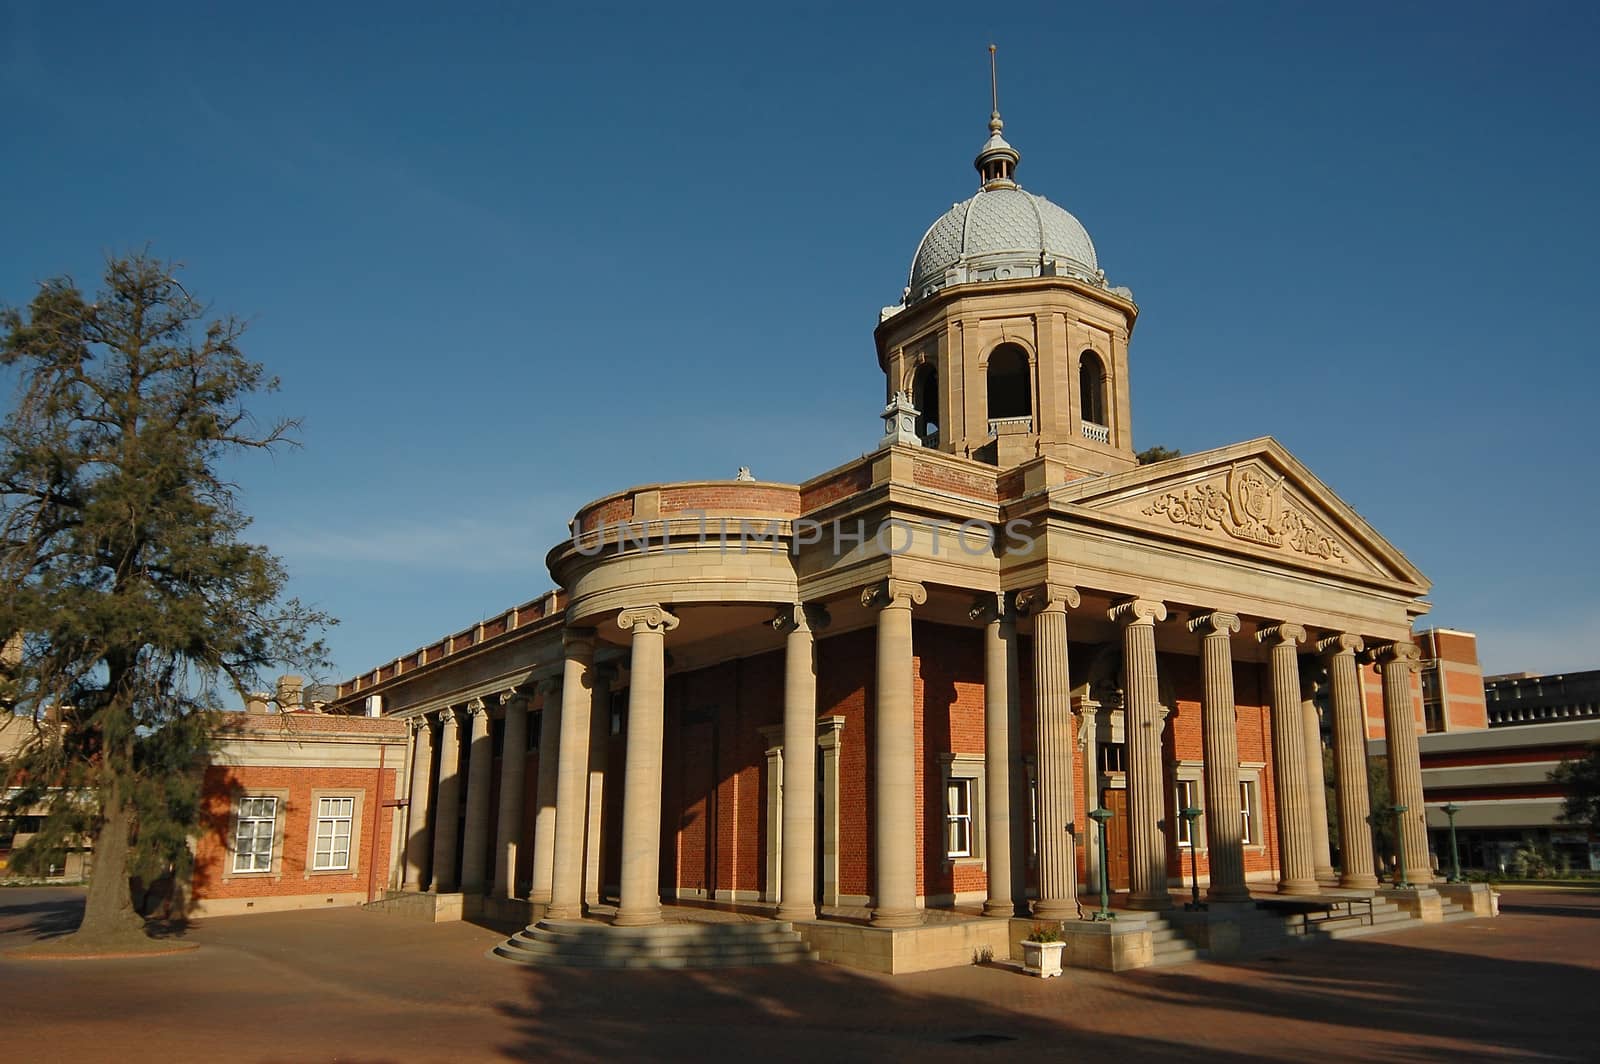 The historical Fourth Raadzaal in Bloemfontein, South Africa, Seat of Free State Provincial Government